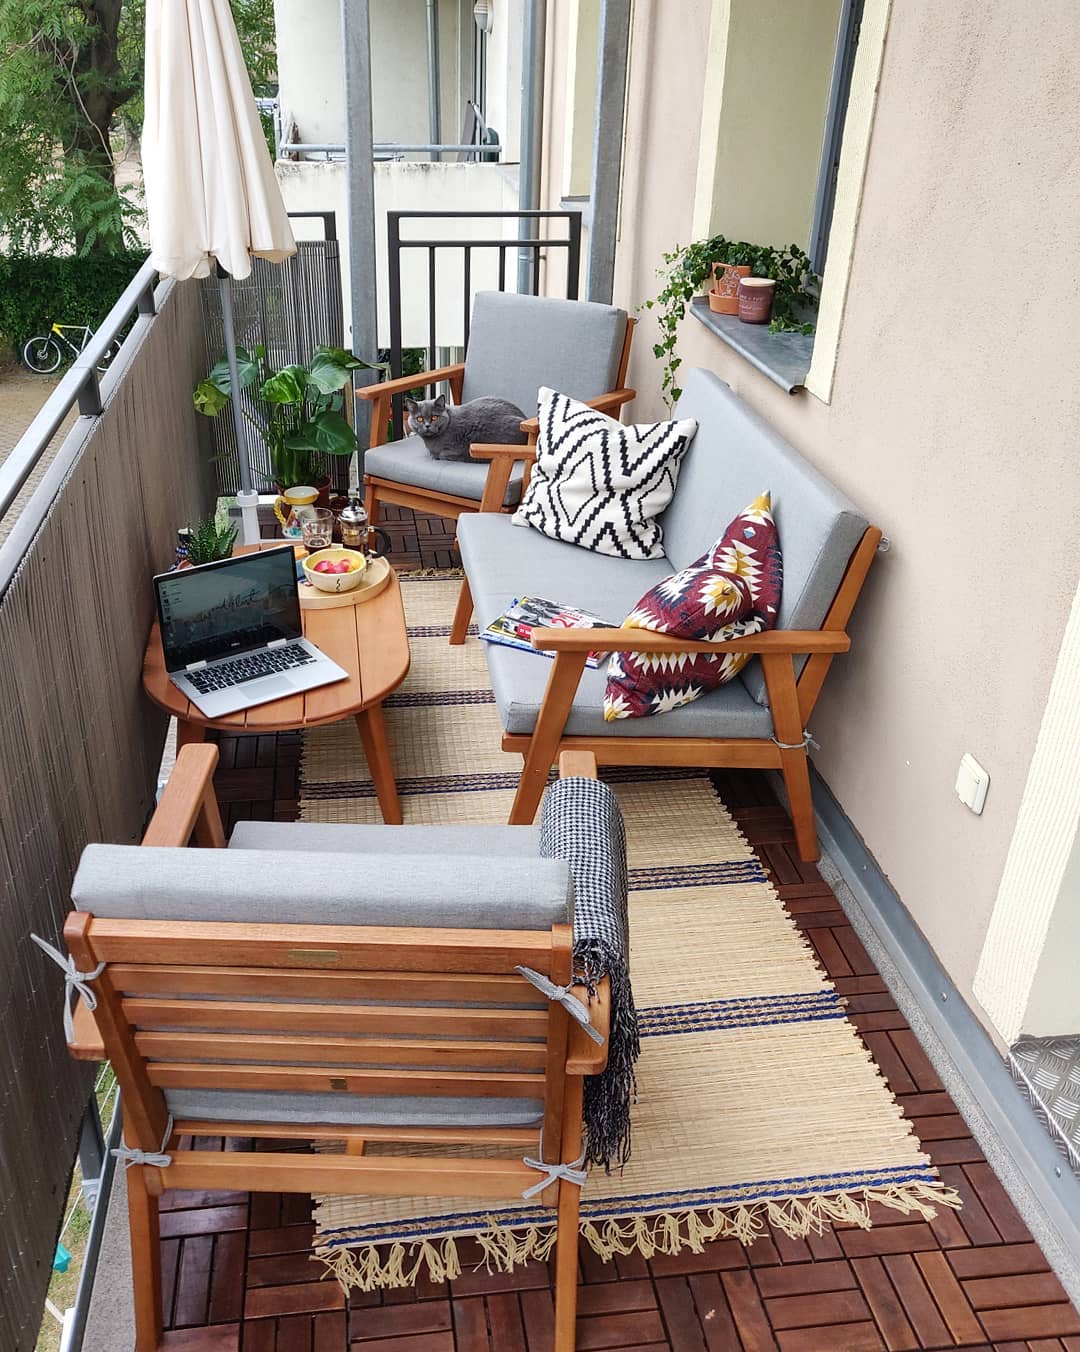 40 Cozy Balcony Ideas and Decor Inspiration 2019 - Page 38 of 41 - My Blog